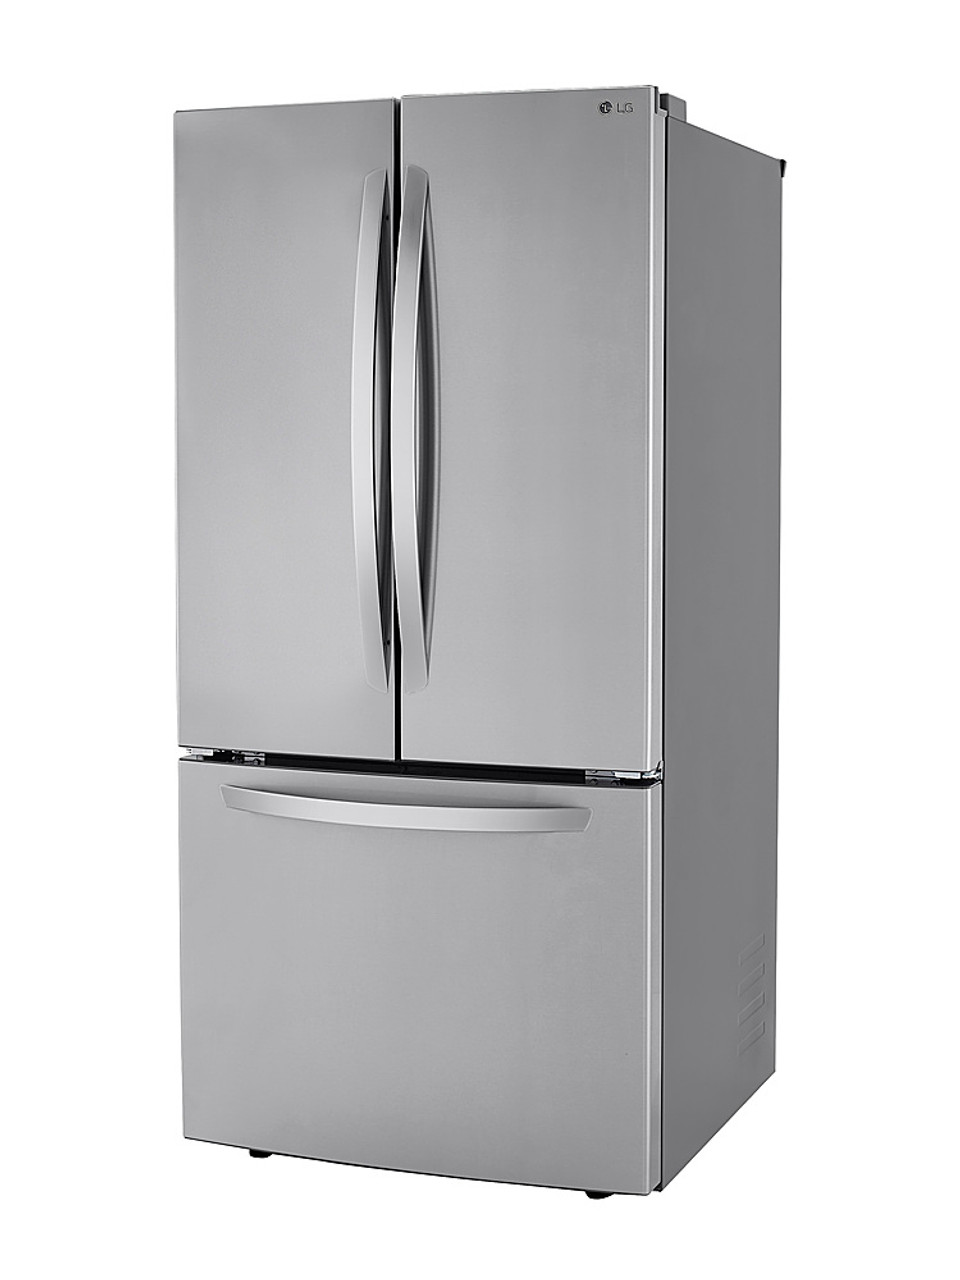 LG - 25.1 Cu. Ft. French Door Refrigerator with Ice Maker - PrintProof Stainless Steel